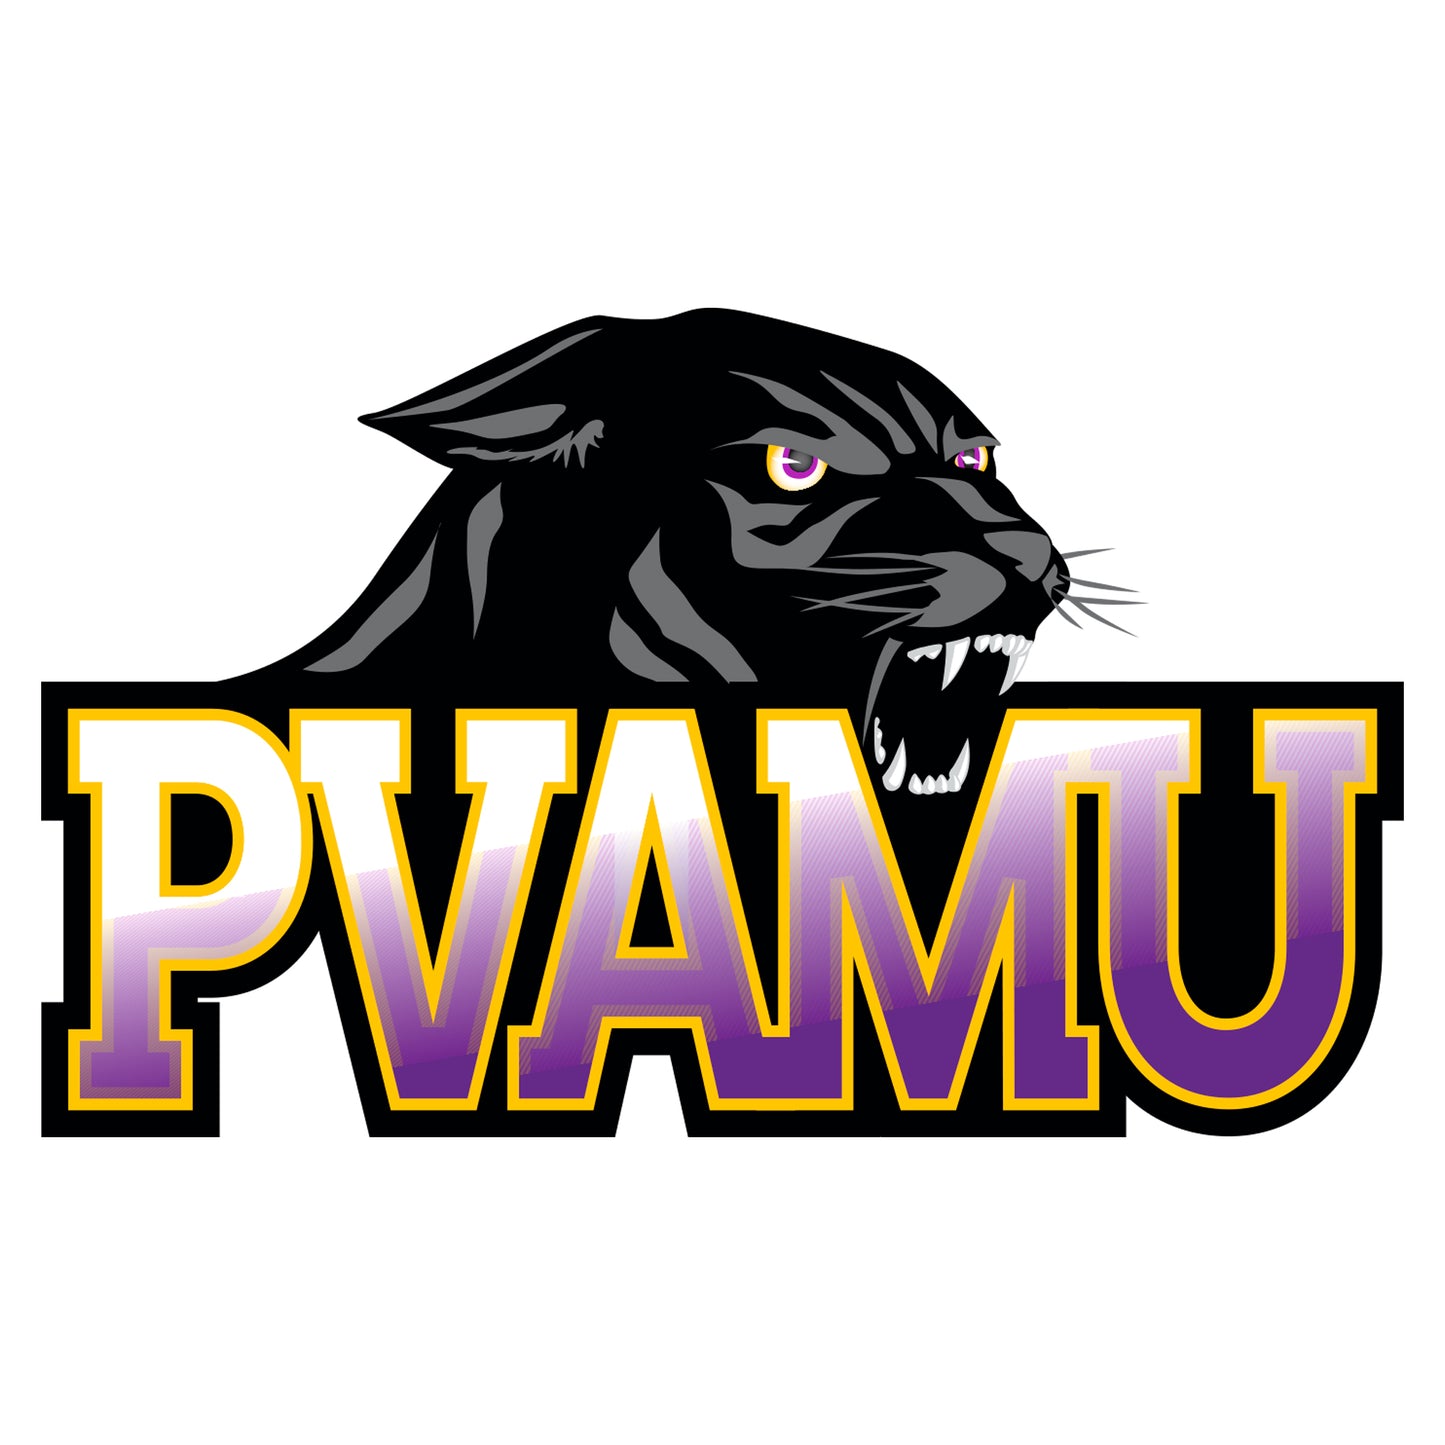 Sheet of 5 -Prairie View A&M U: Prairie View A&M Panthers  Logo Minis        - Officially Licensed NCAA Removable    Adhesive Decal